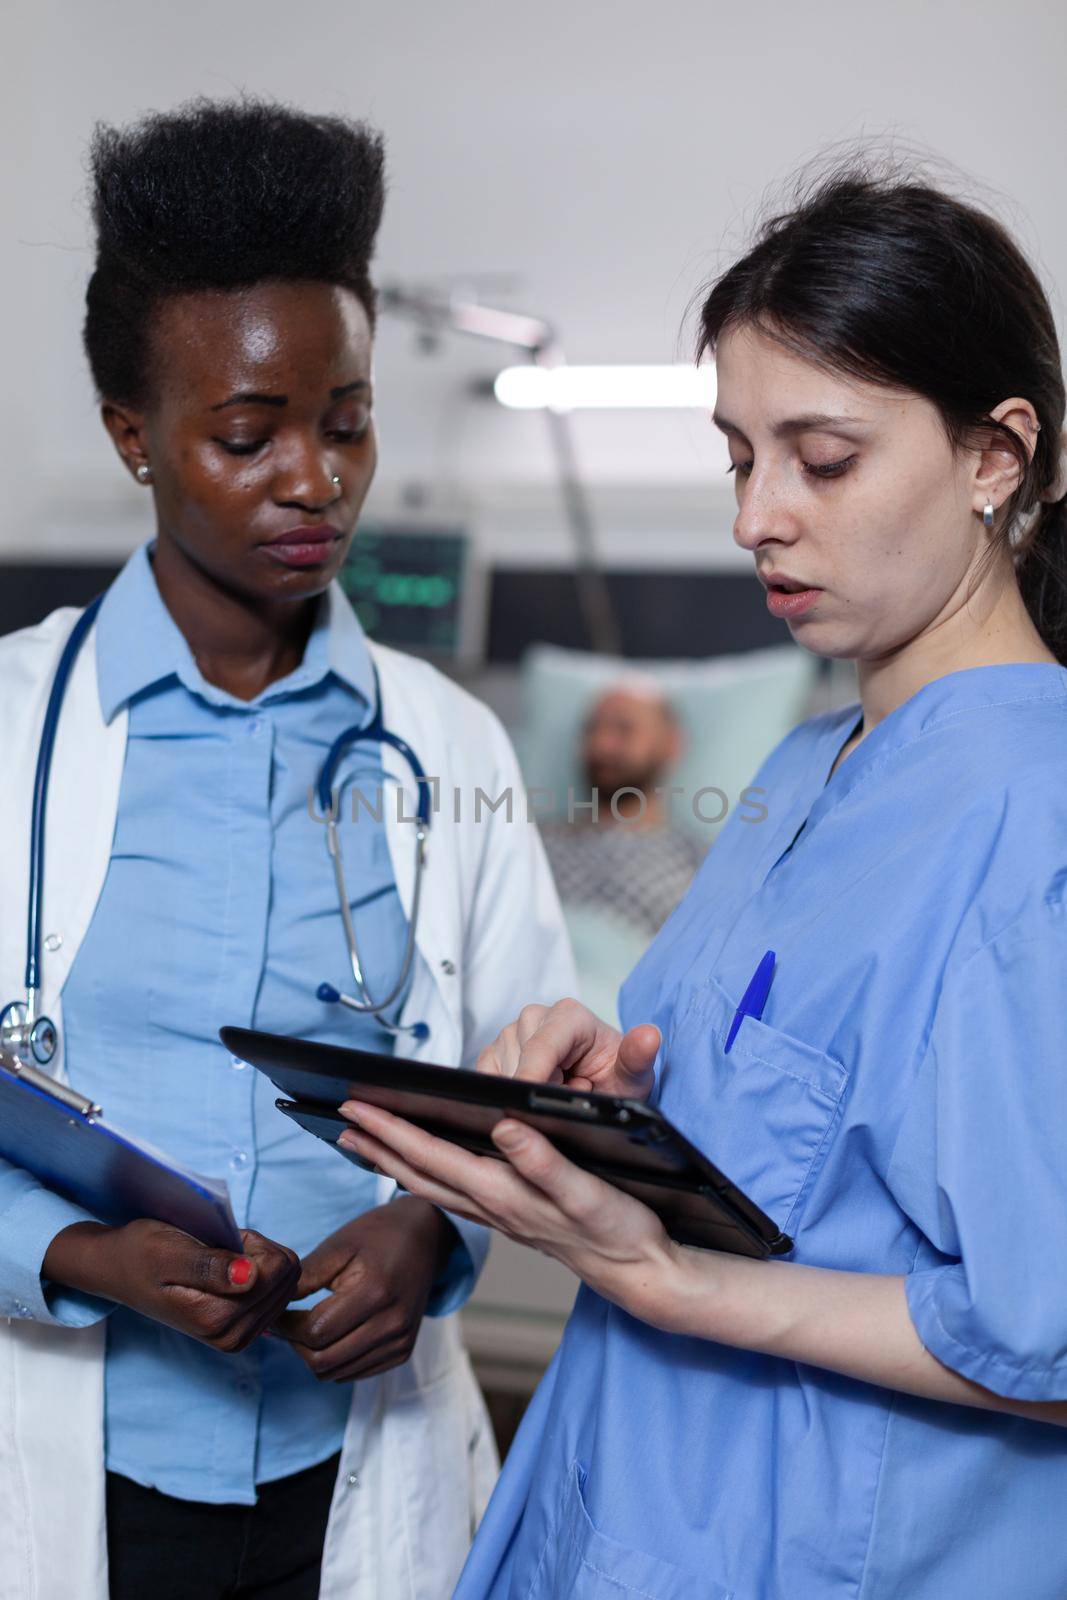 Nurse showing lab results from digital tablet to doctor holding clipboard with medical history by DCStudio